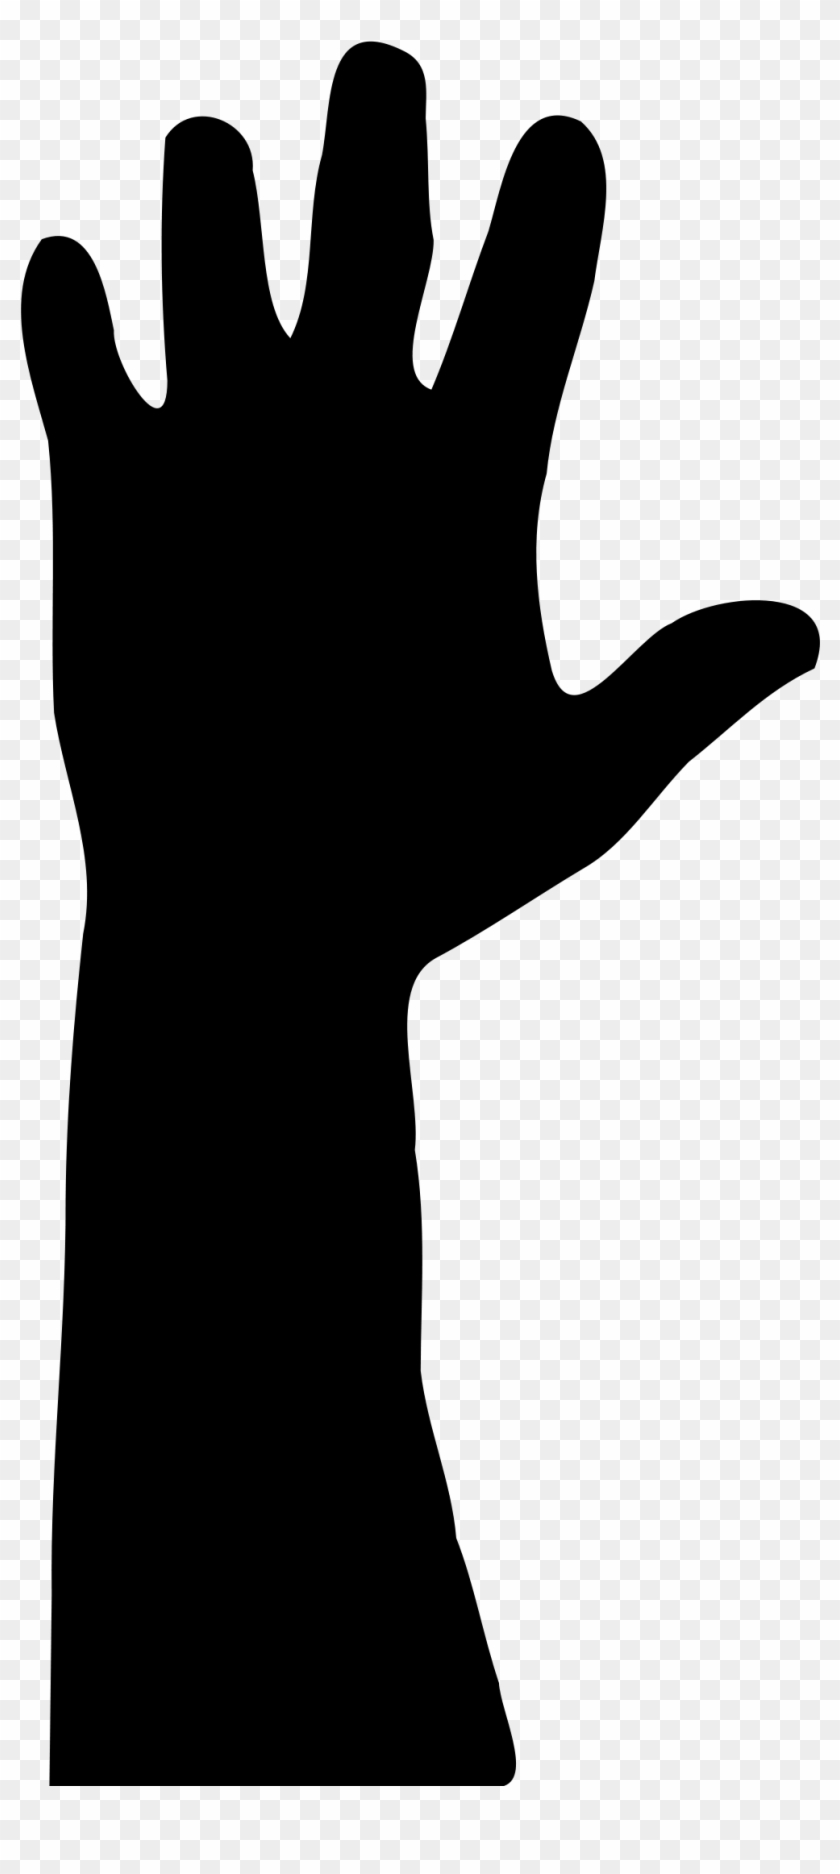 Reaching Hand Clipart - Hand Reaching Vector Png #283662